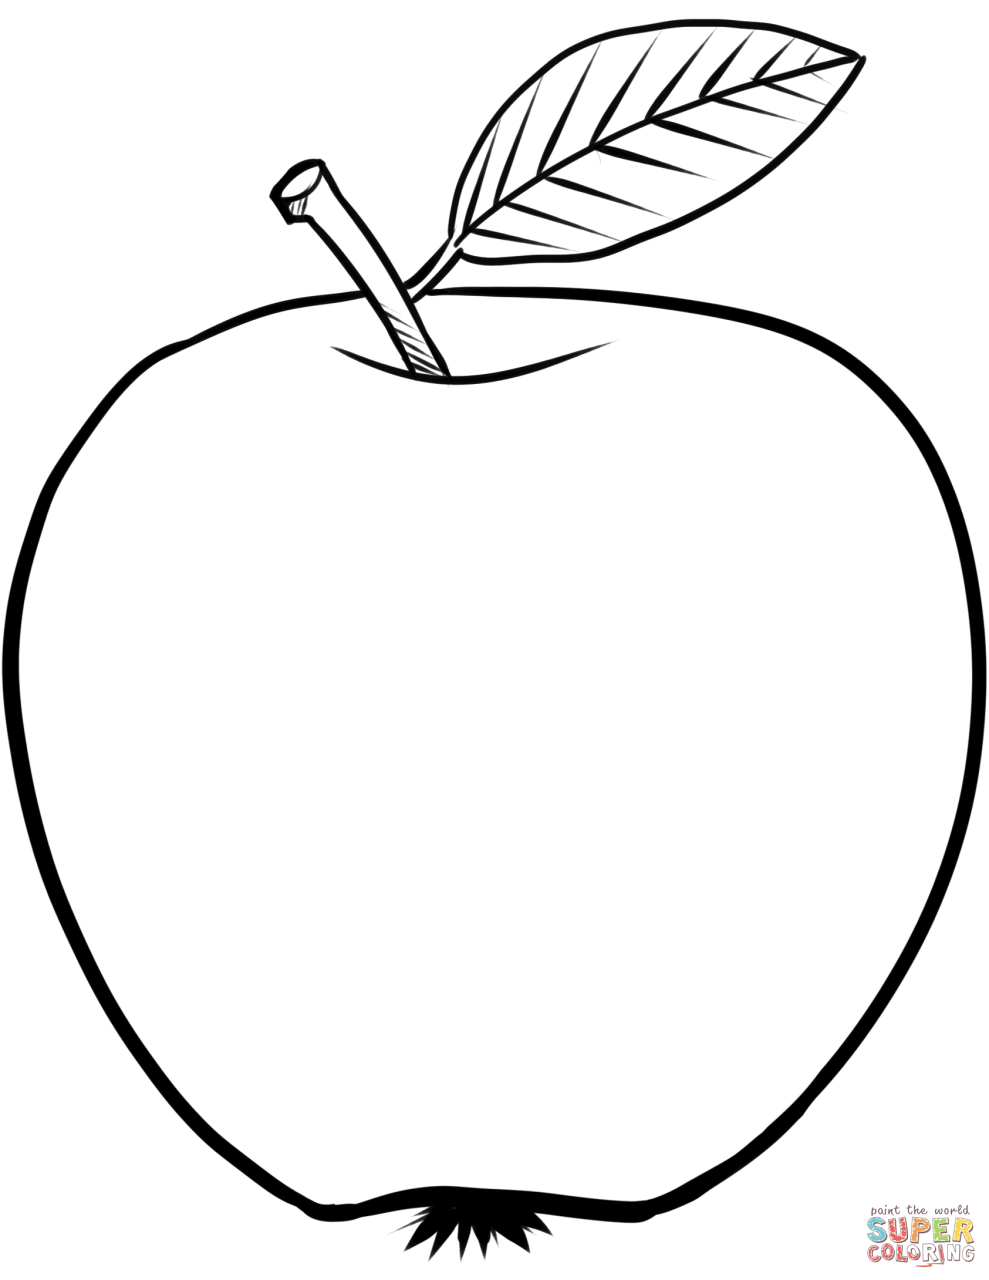 Apple coloring page Free Printable Coloring Pages